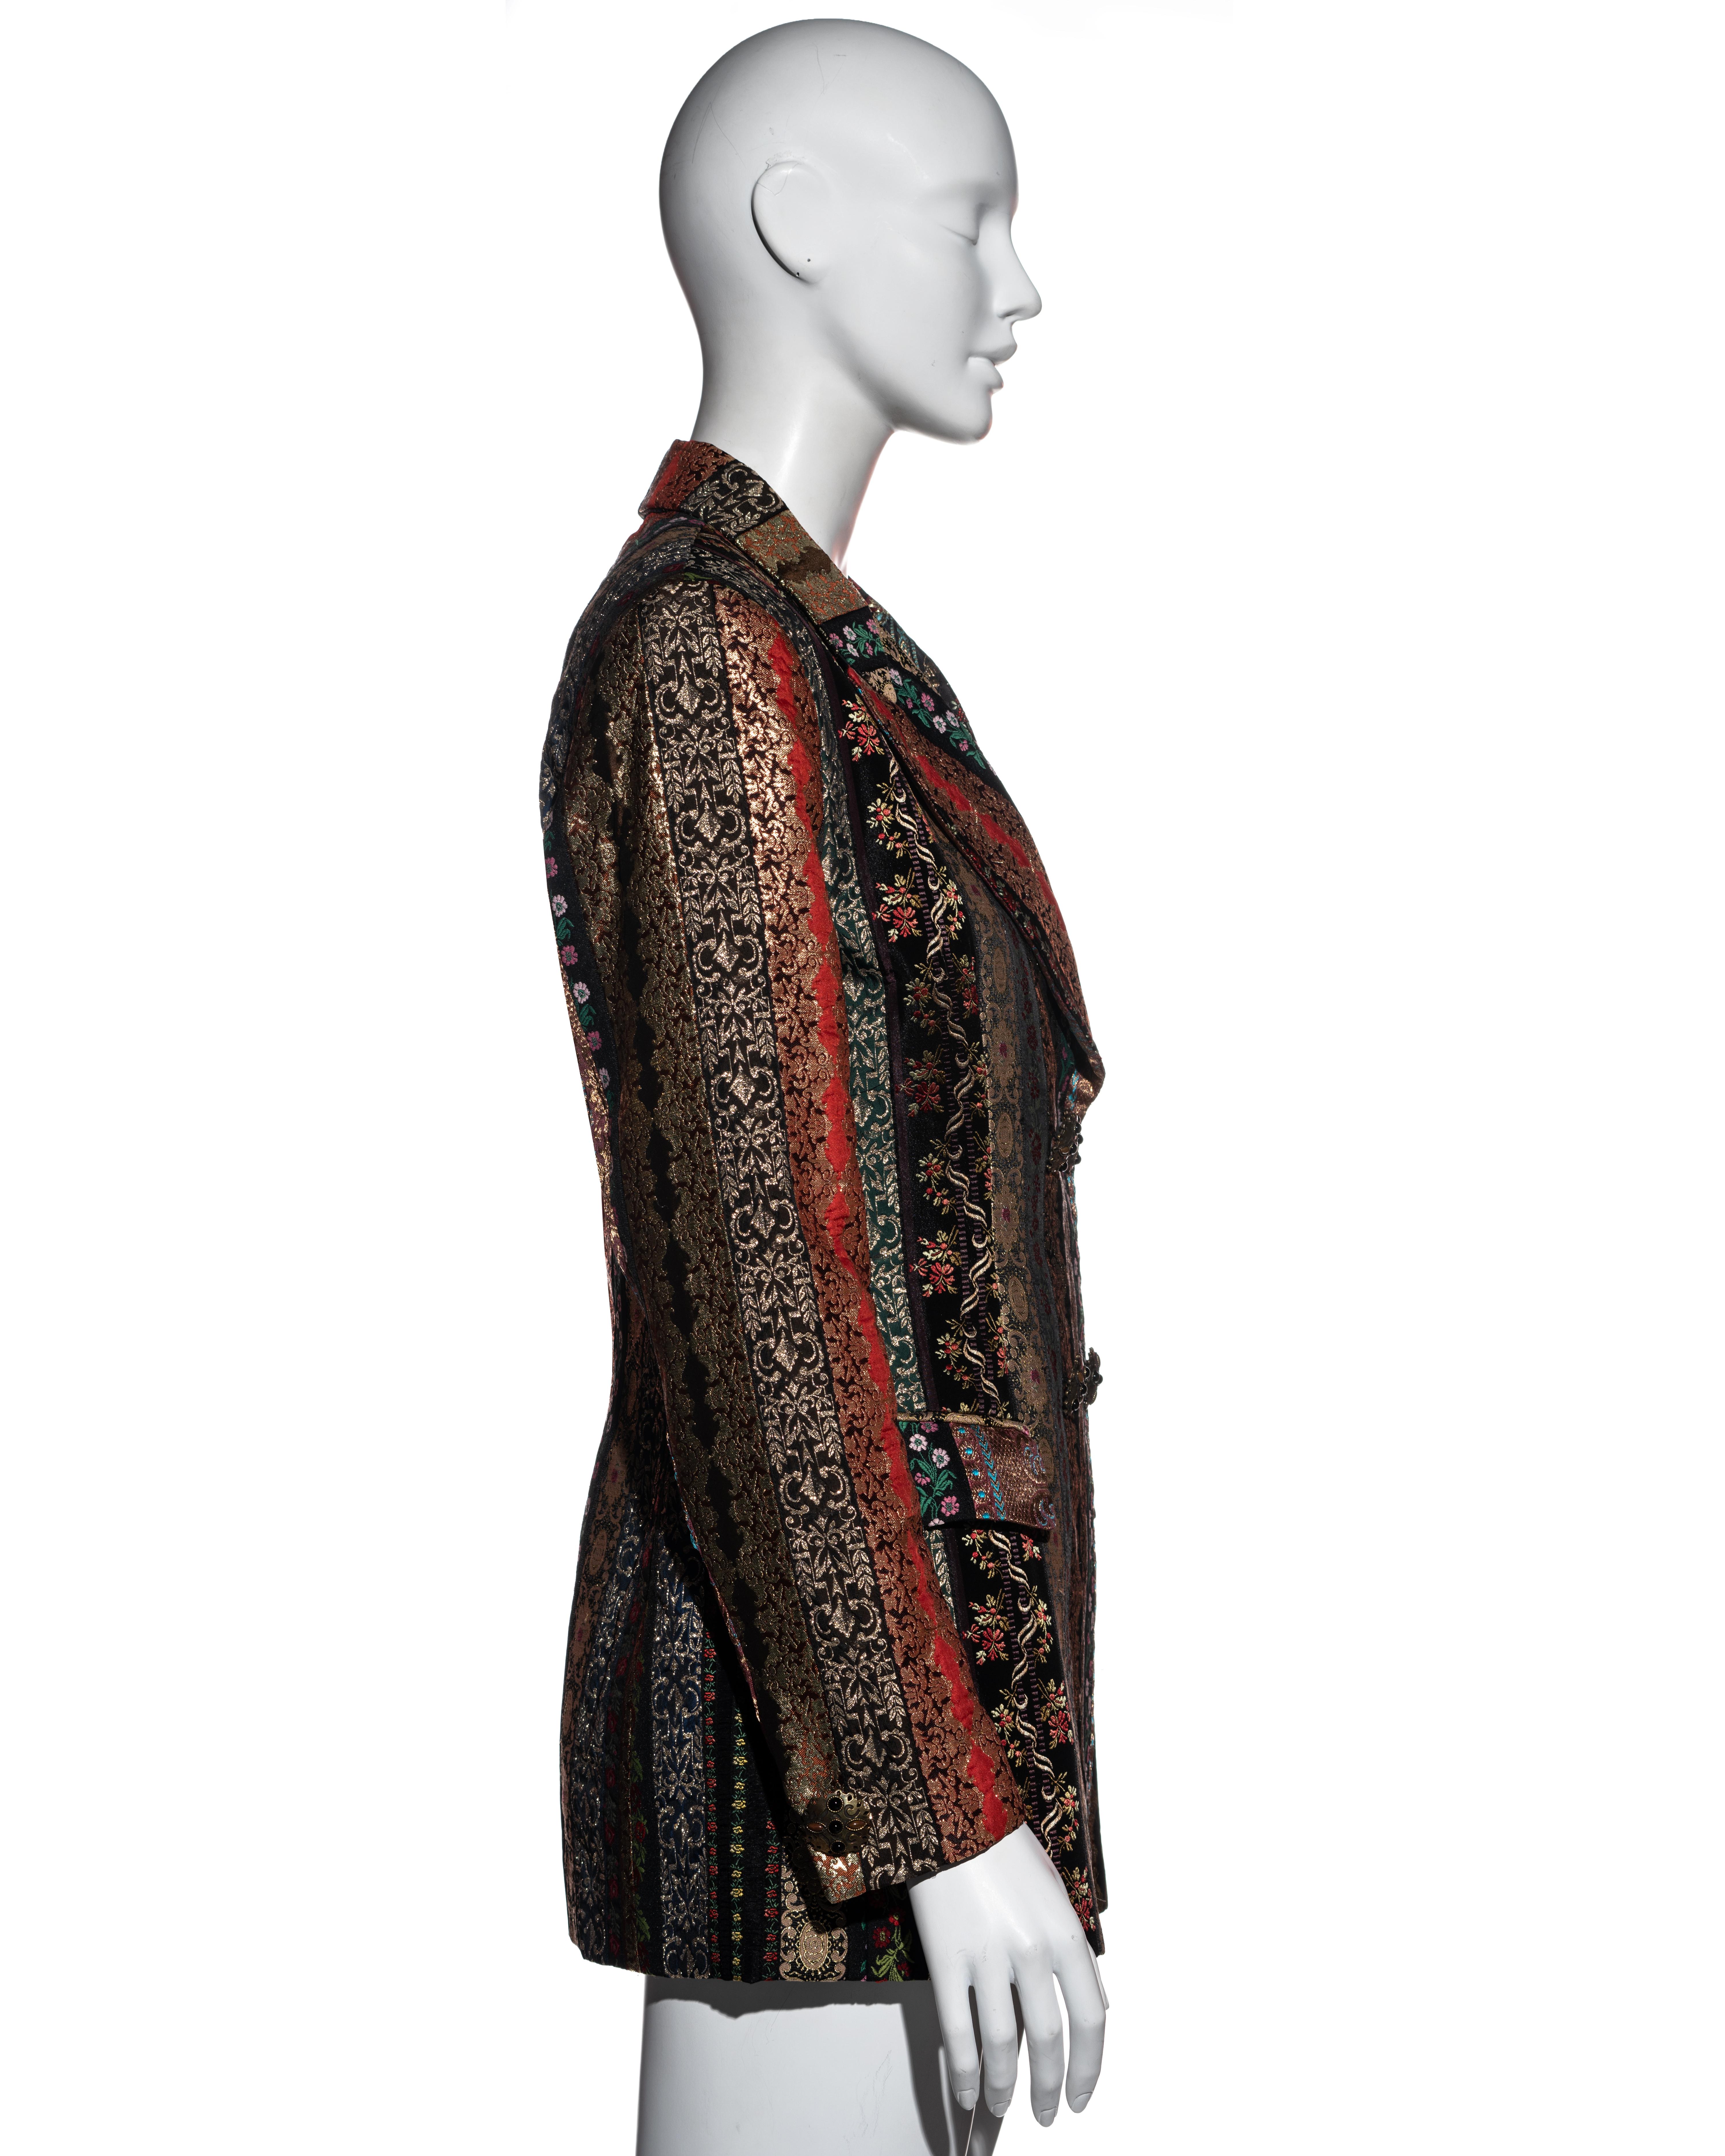 Dolce & Gabbana lamé brocade double-breasted blazer jacket, ss 1993 For Sale 1